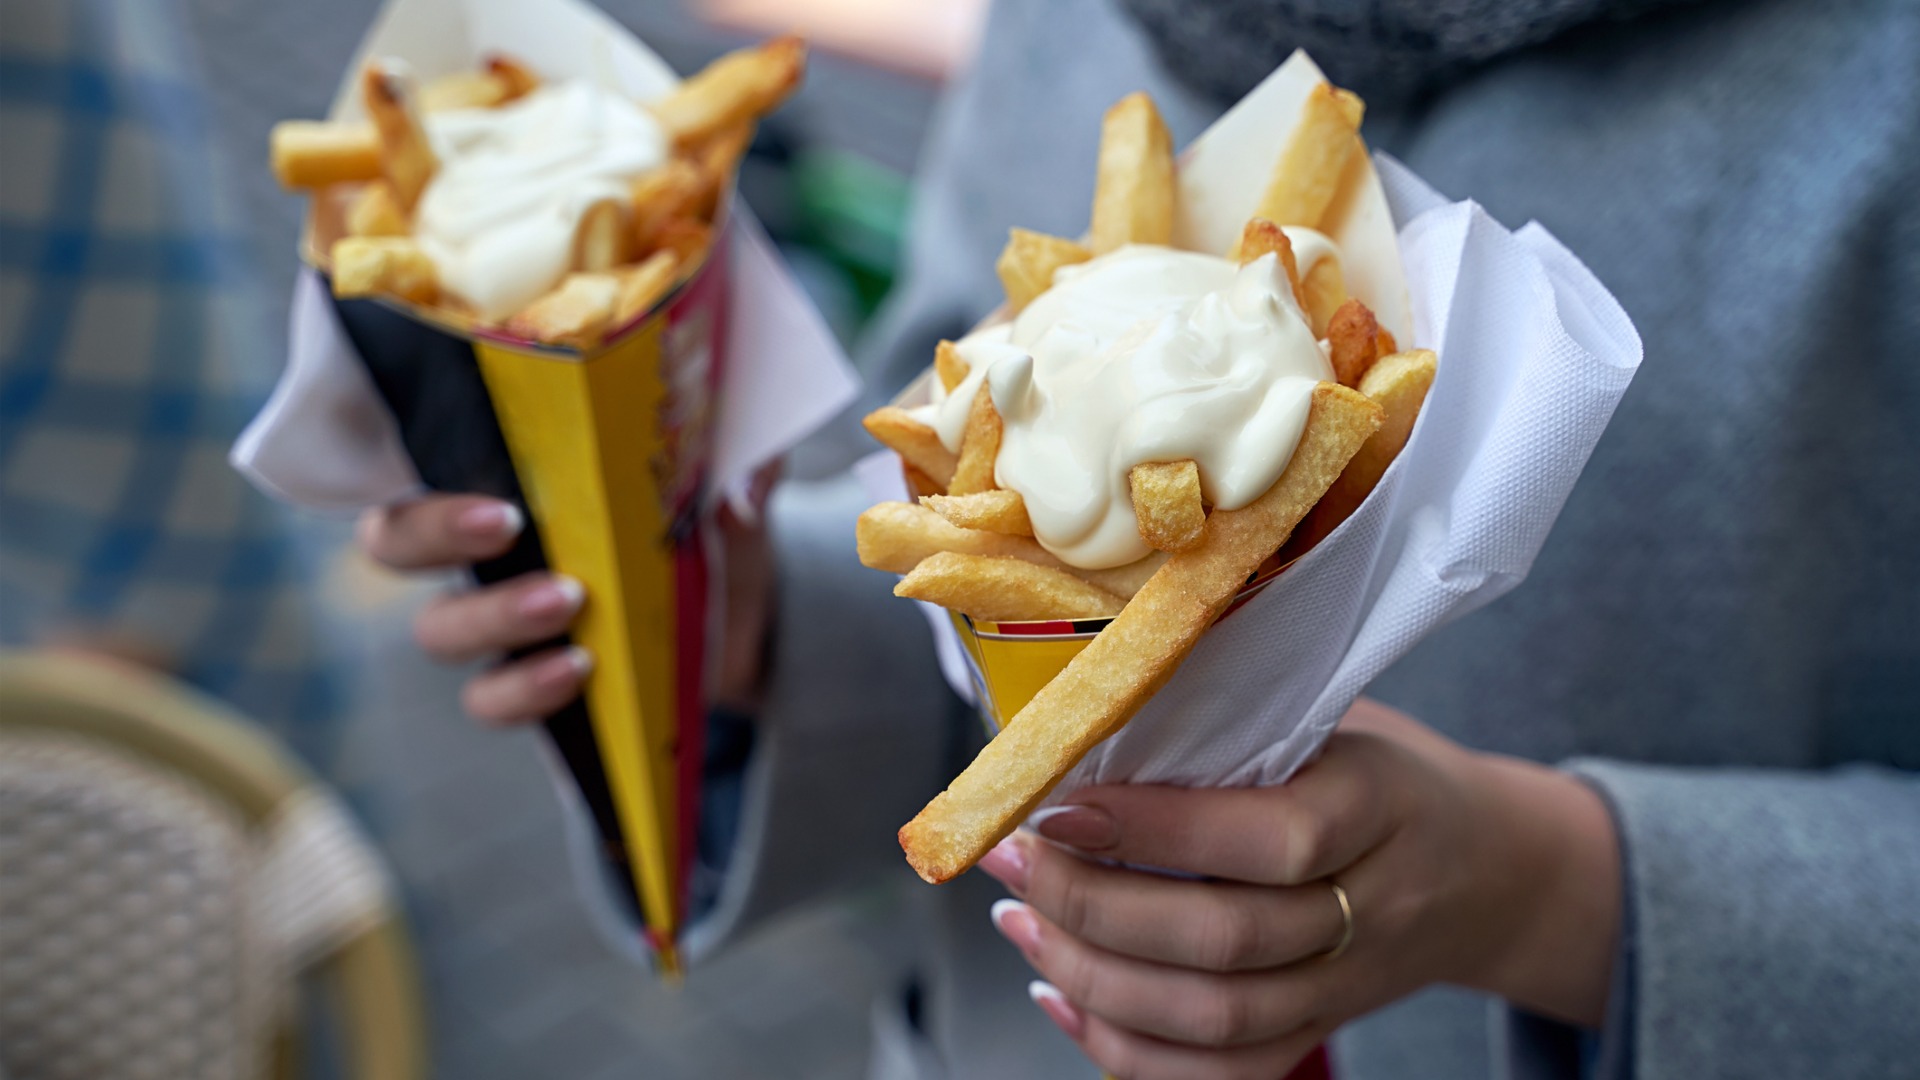 This image is a close-up of a woman holding two paper cones filled with Belgian frites, topped with mayonnaise sauce. Sampling Belgian frites is one of the main reasons to visit Brussels. 